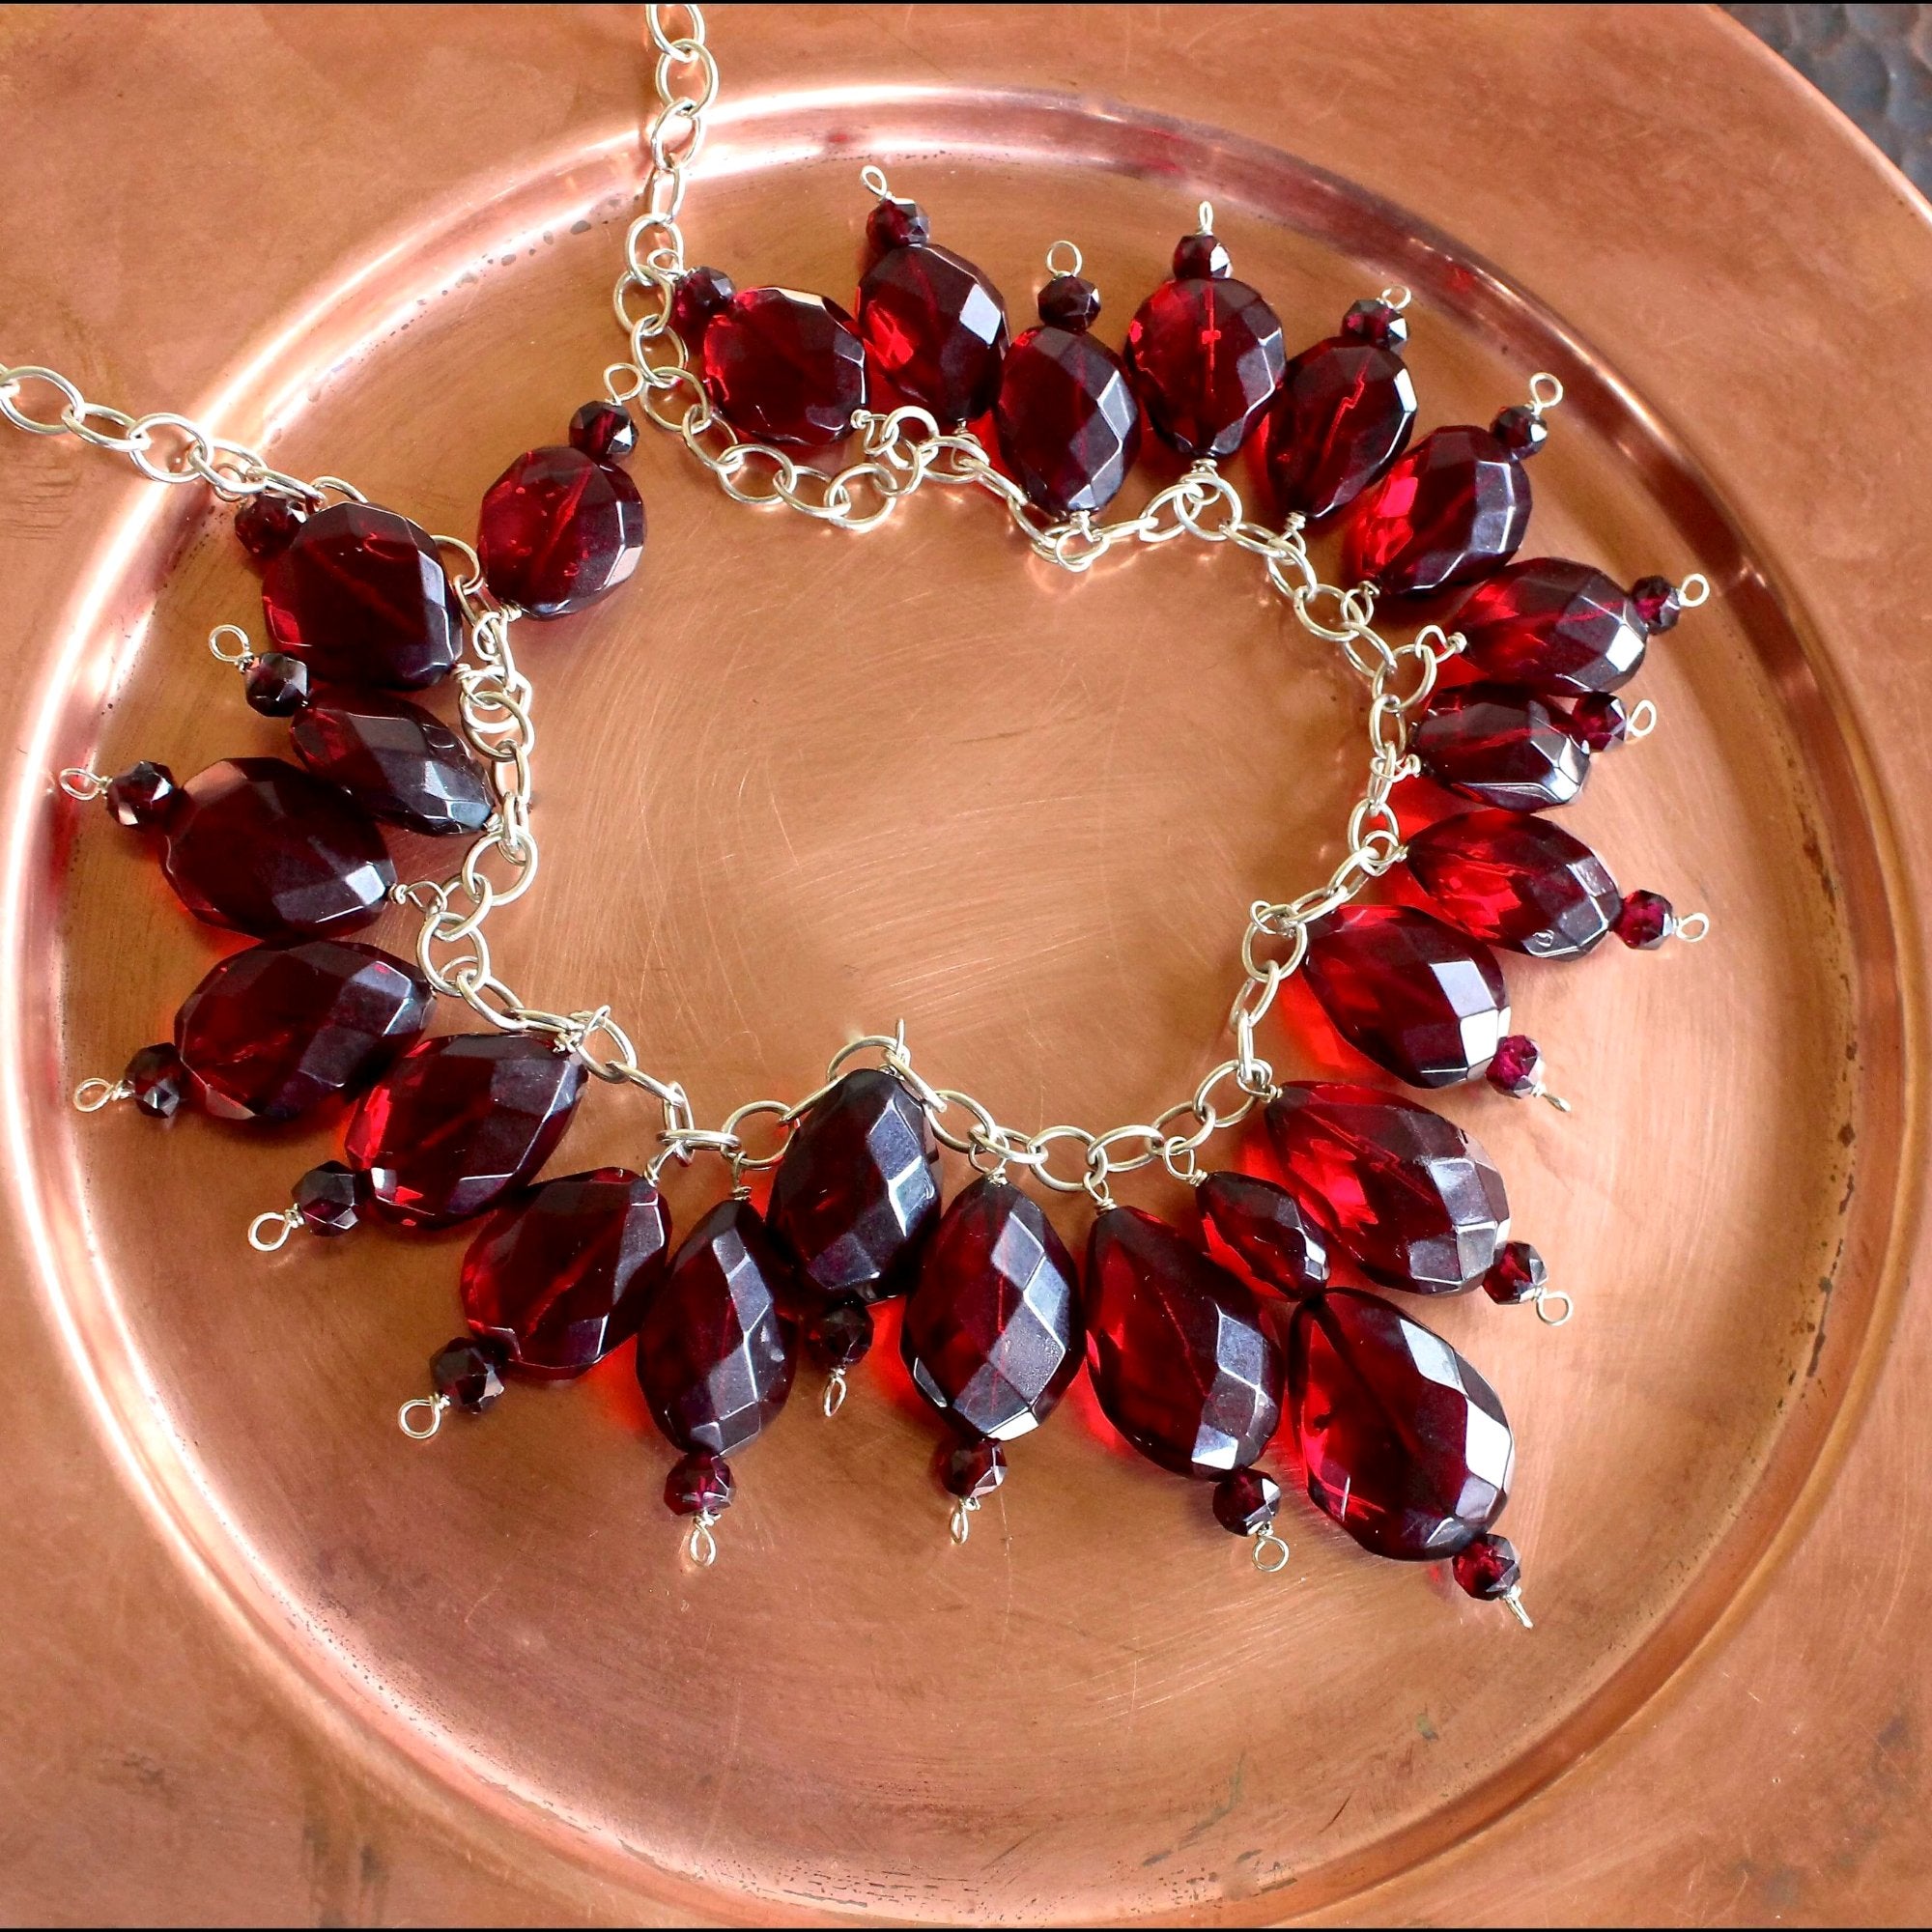 An overhead, in-focus, close-up shot of the Faceted Red Baltic Amber, Red Garnet, Sterling Silver and Hill Tribe Silver Beaded Necklace, showing the luminescence and vibrant red color of the amber beads in diffused natural daylight. The necklace sits on a matte copper dish.